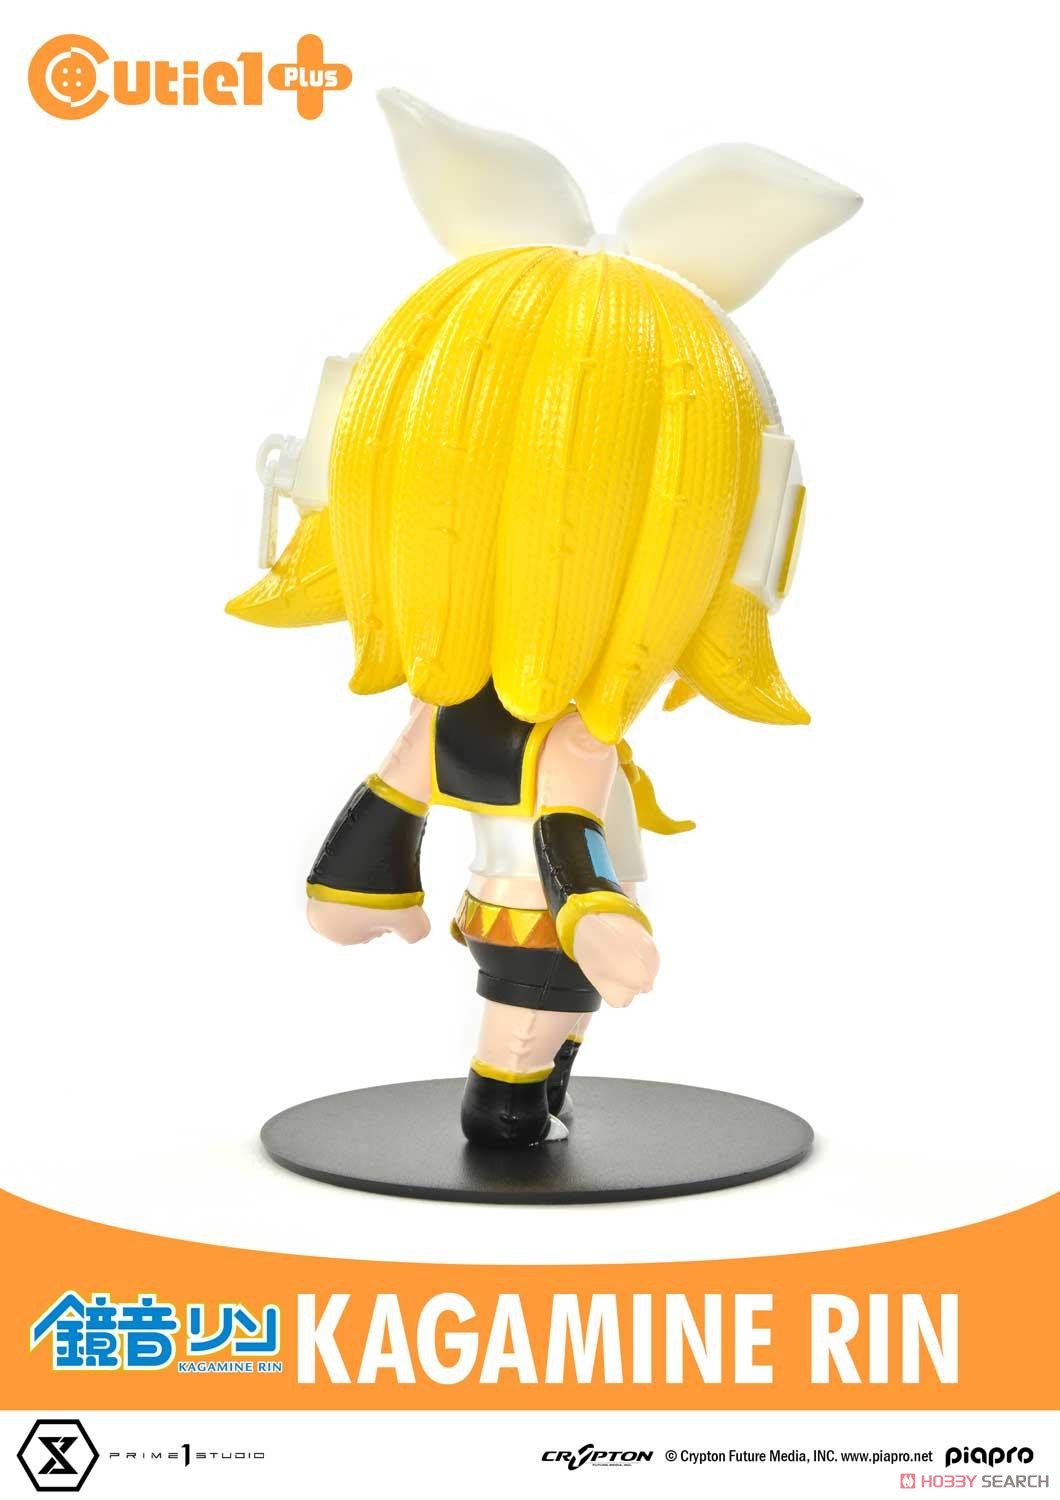 Cutie1 Plus Piapro Characters Kagamine Rin (Completed) Item picture3